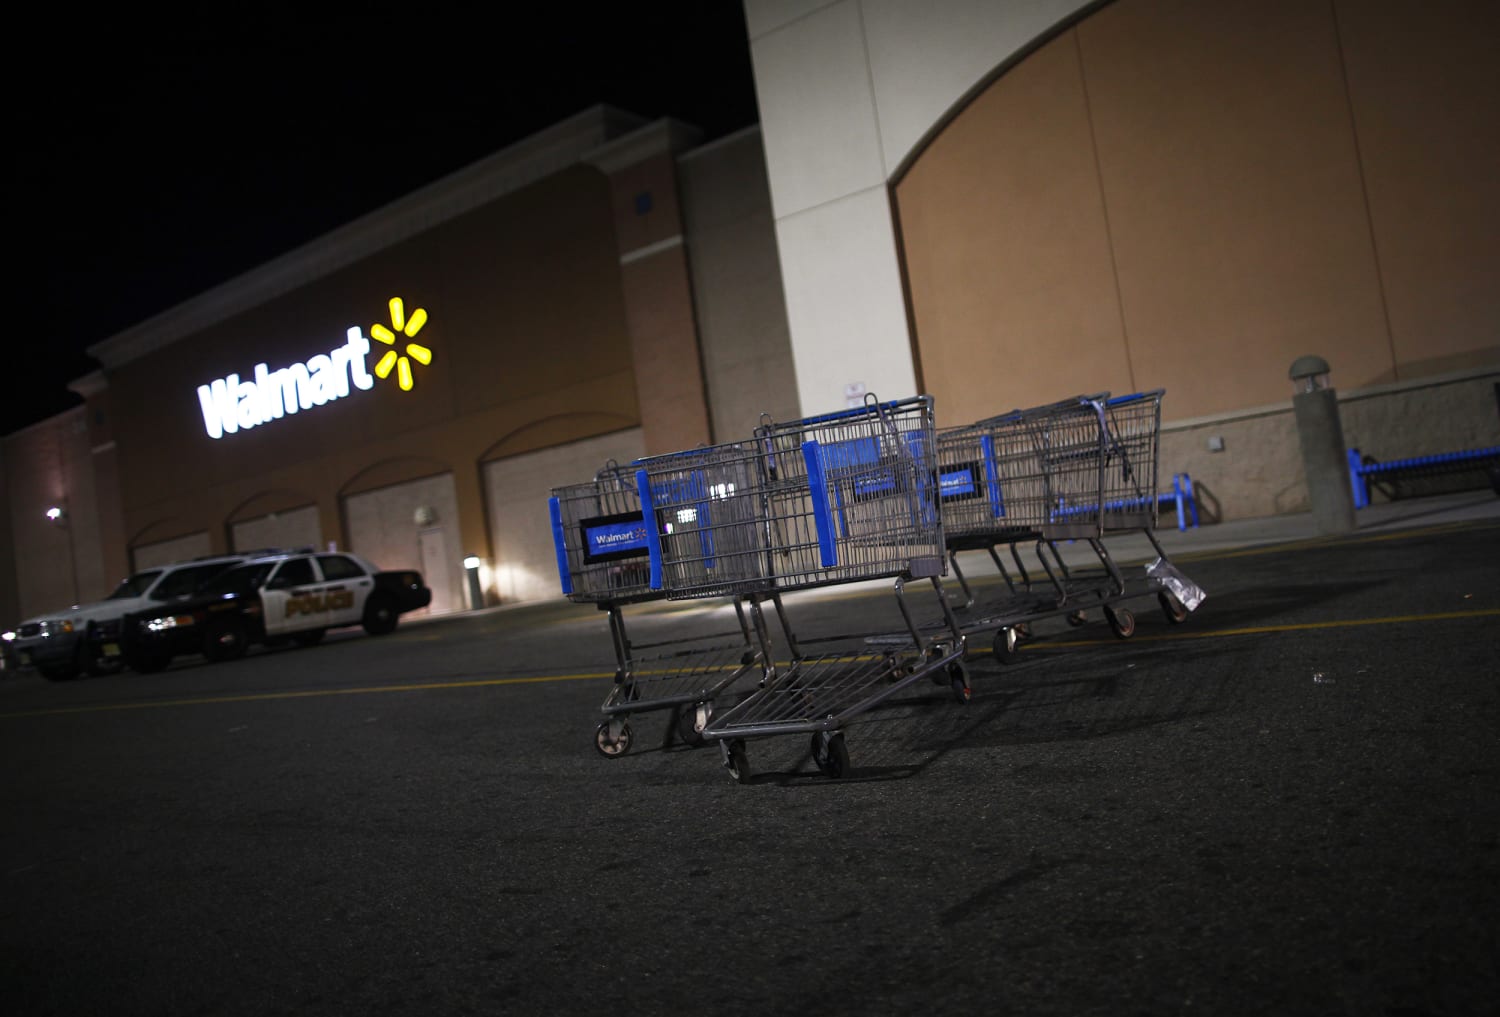 Walmart temporarily closing Vegas store for COVID cleaning